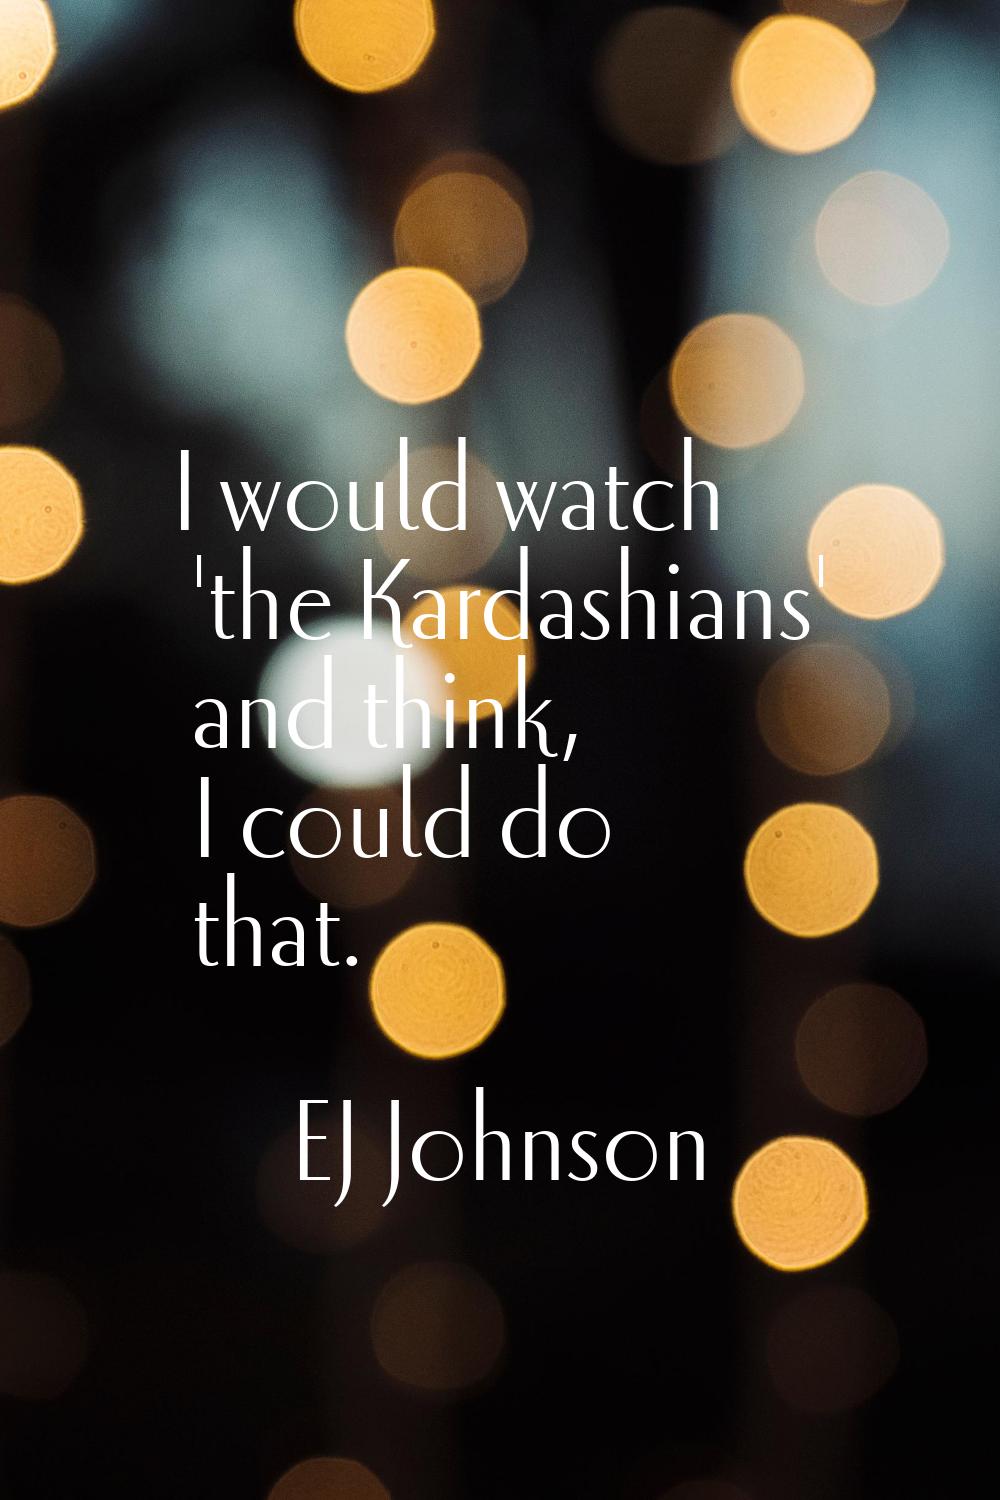 I would watch 'the Kardashians' and think, I could do that.